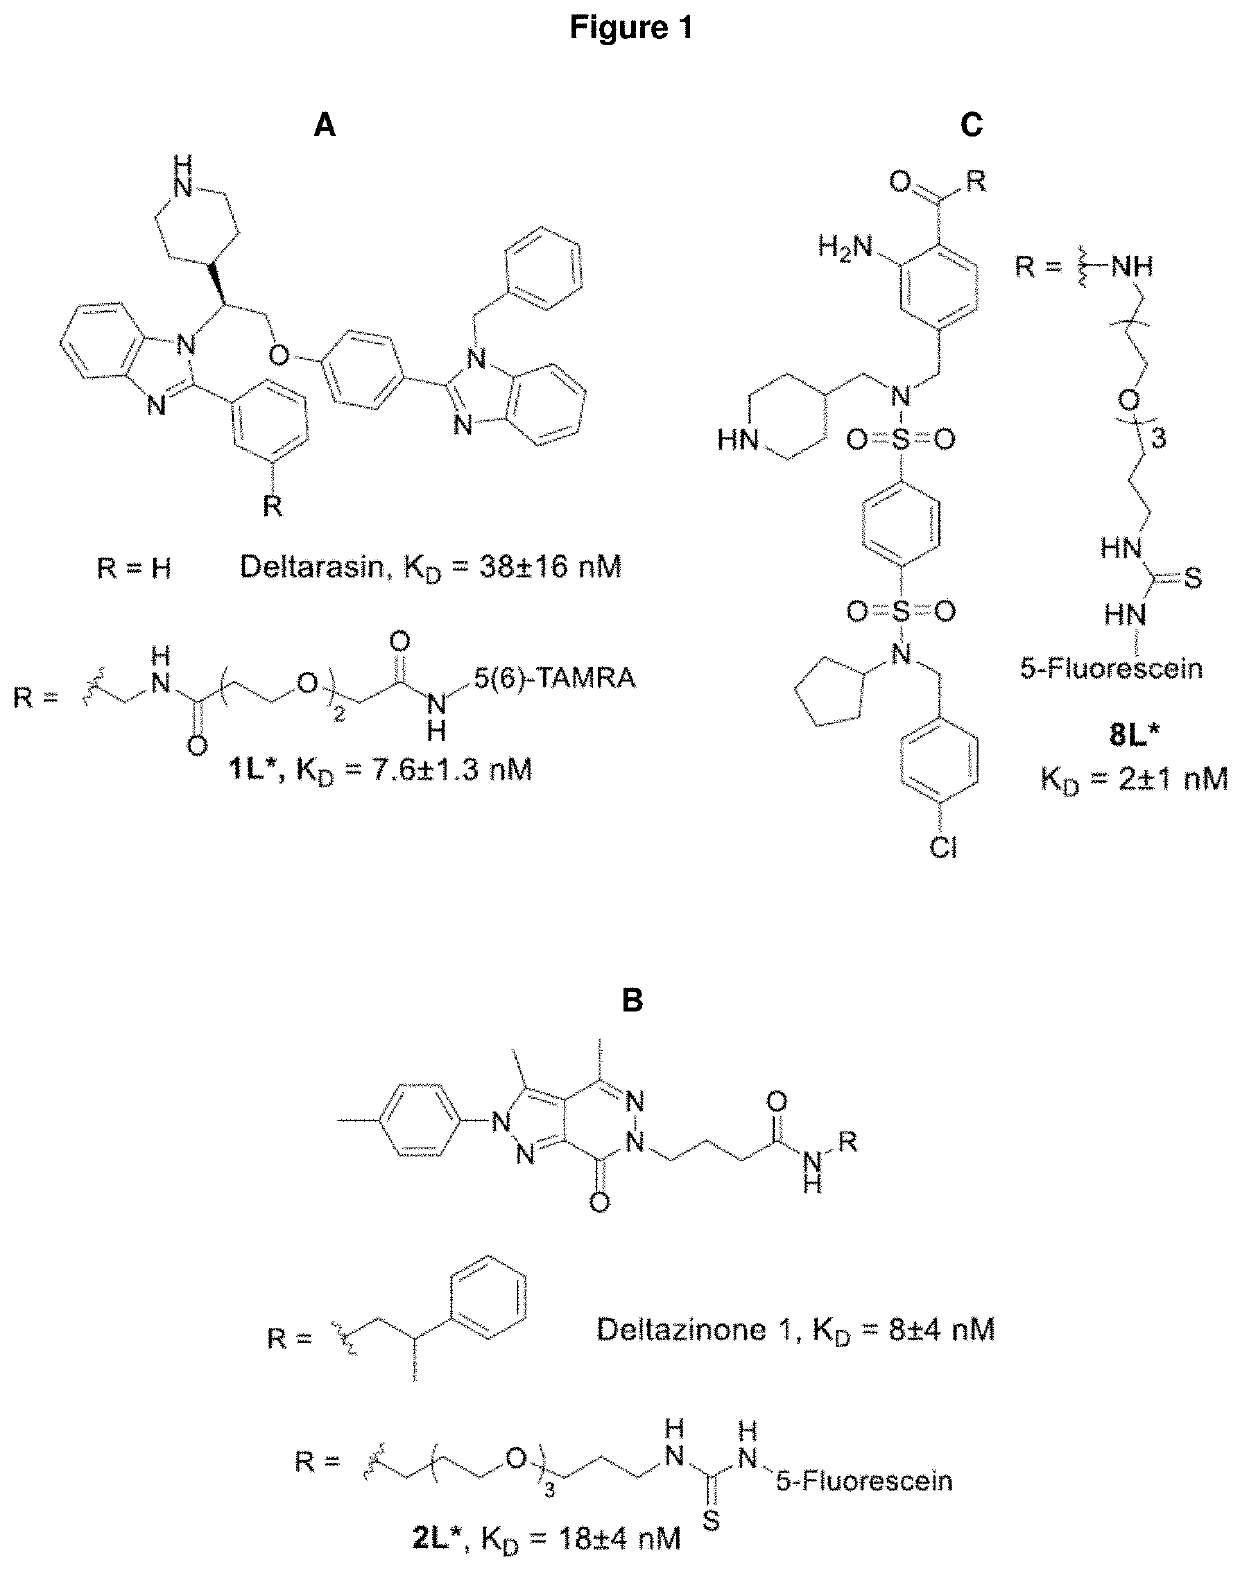 Benzene disulfonamide for the treatment of cancer